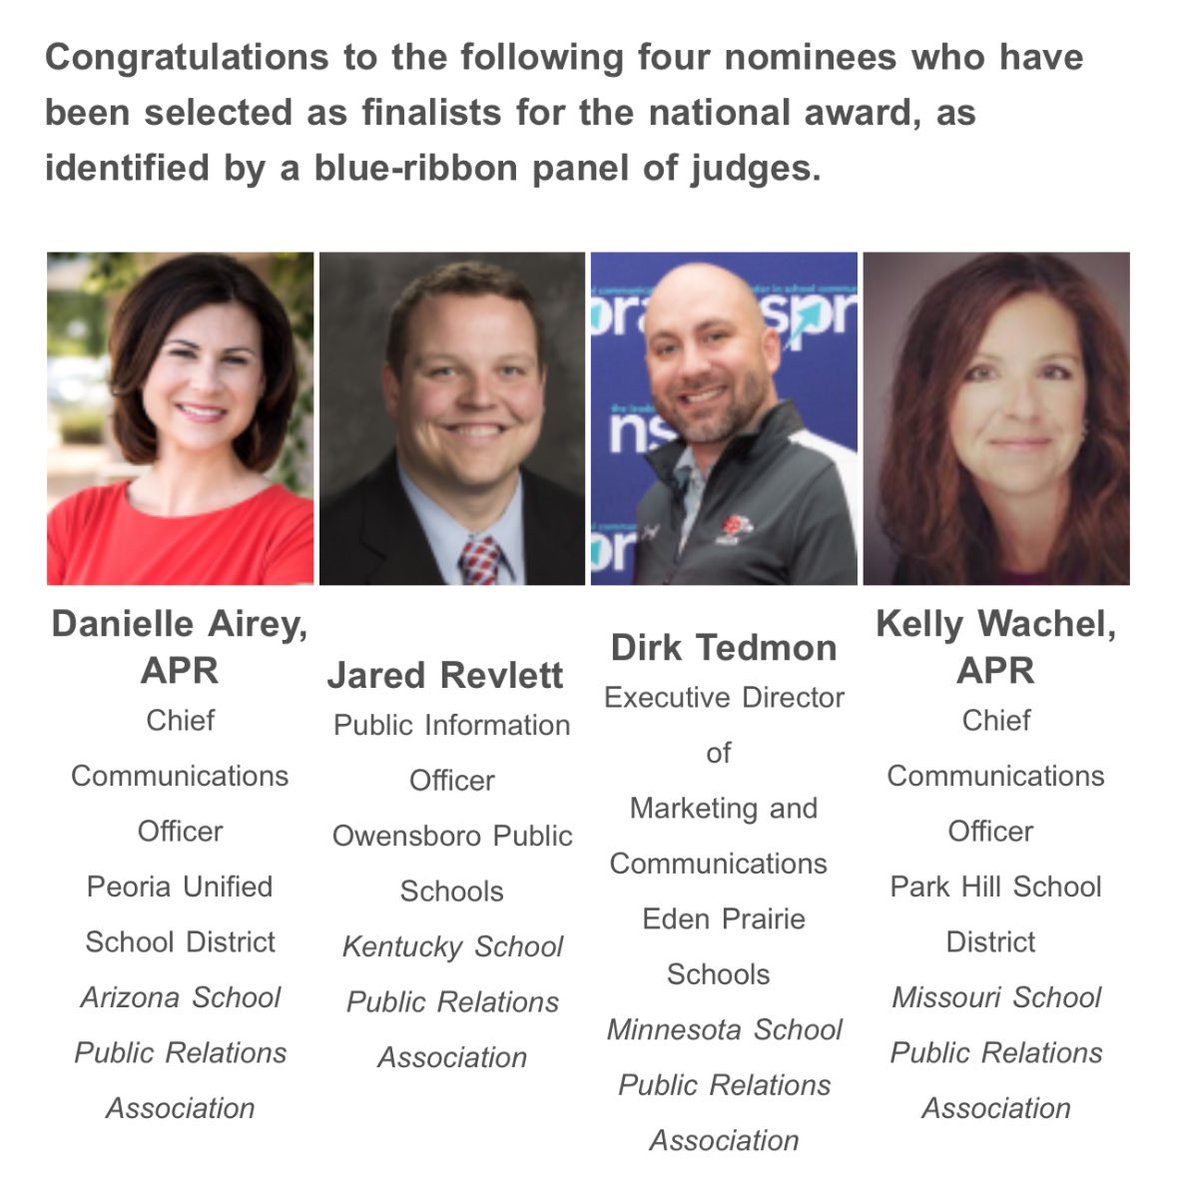 Congratulations to the four finalists for @NSPRA’s National School Communicator of the Year- especially my friend and @KySchoolPR colleague, Jared Revlett!

@ops_pio